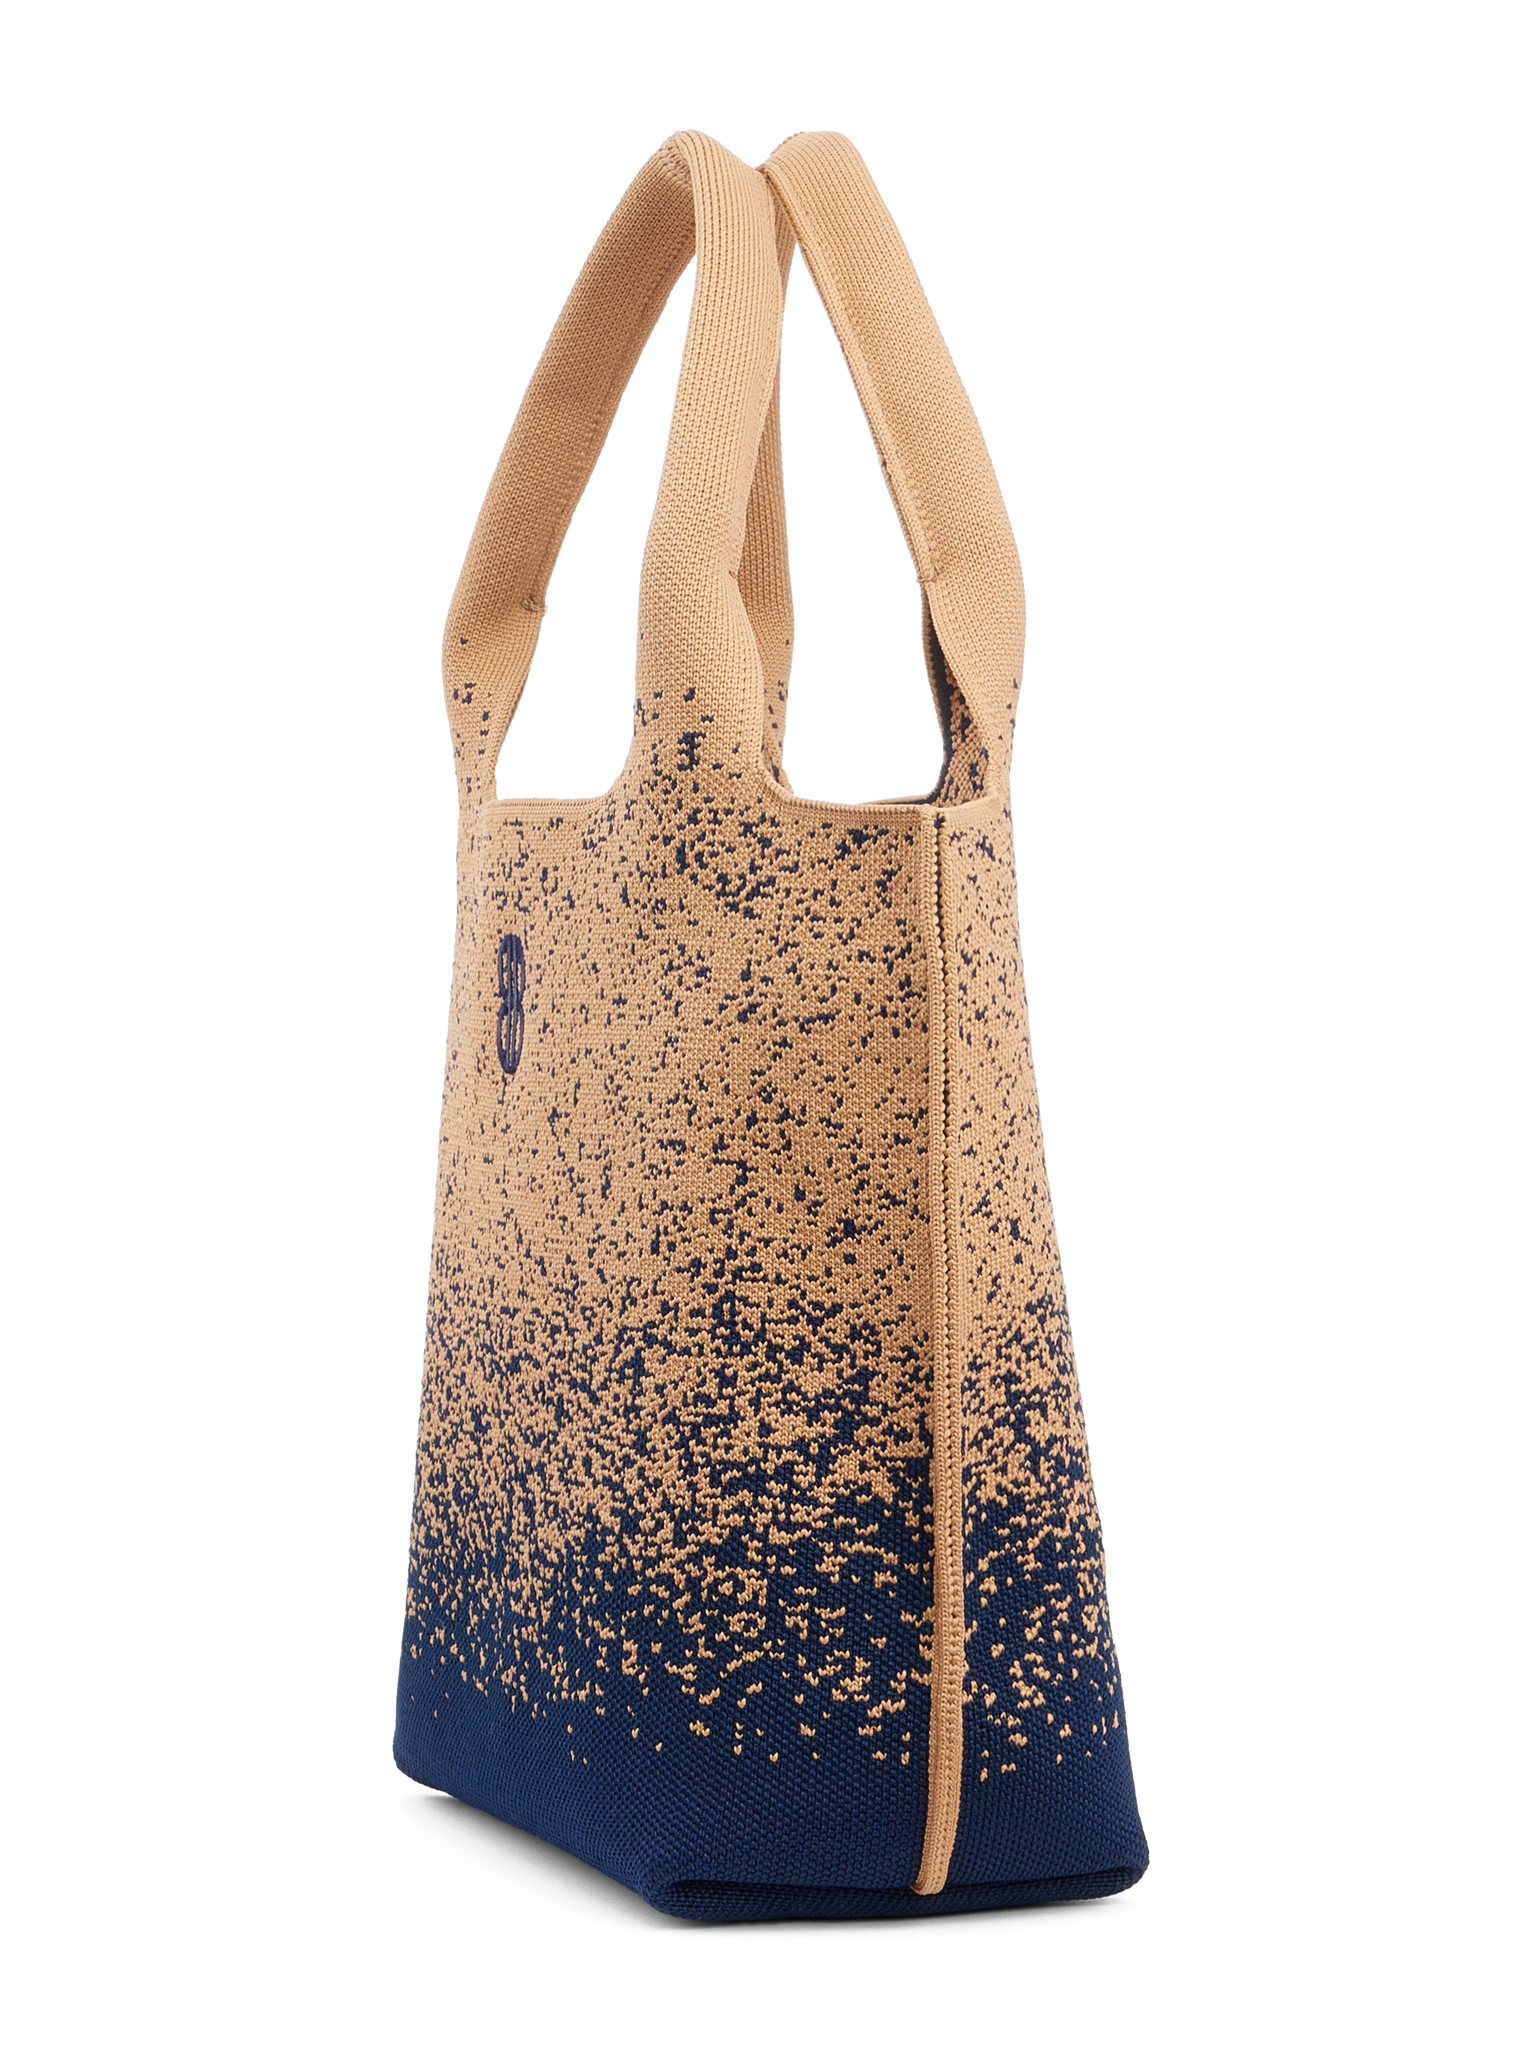 Sutton City Tote - Navy Buckthorn Sprinkle - Small